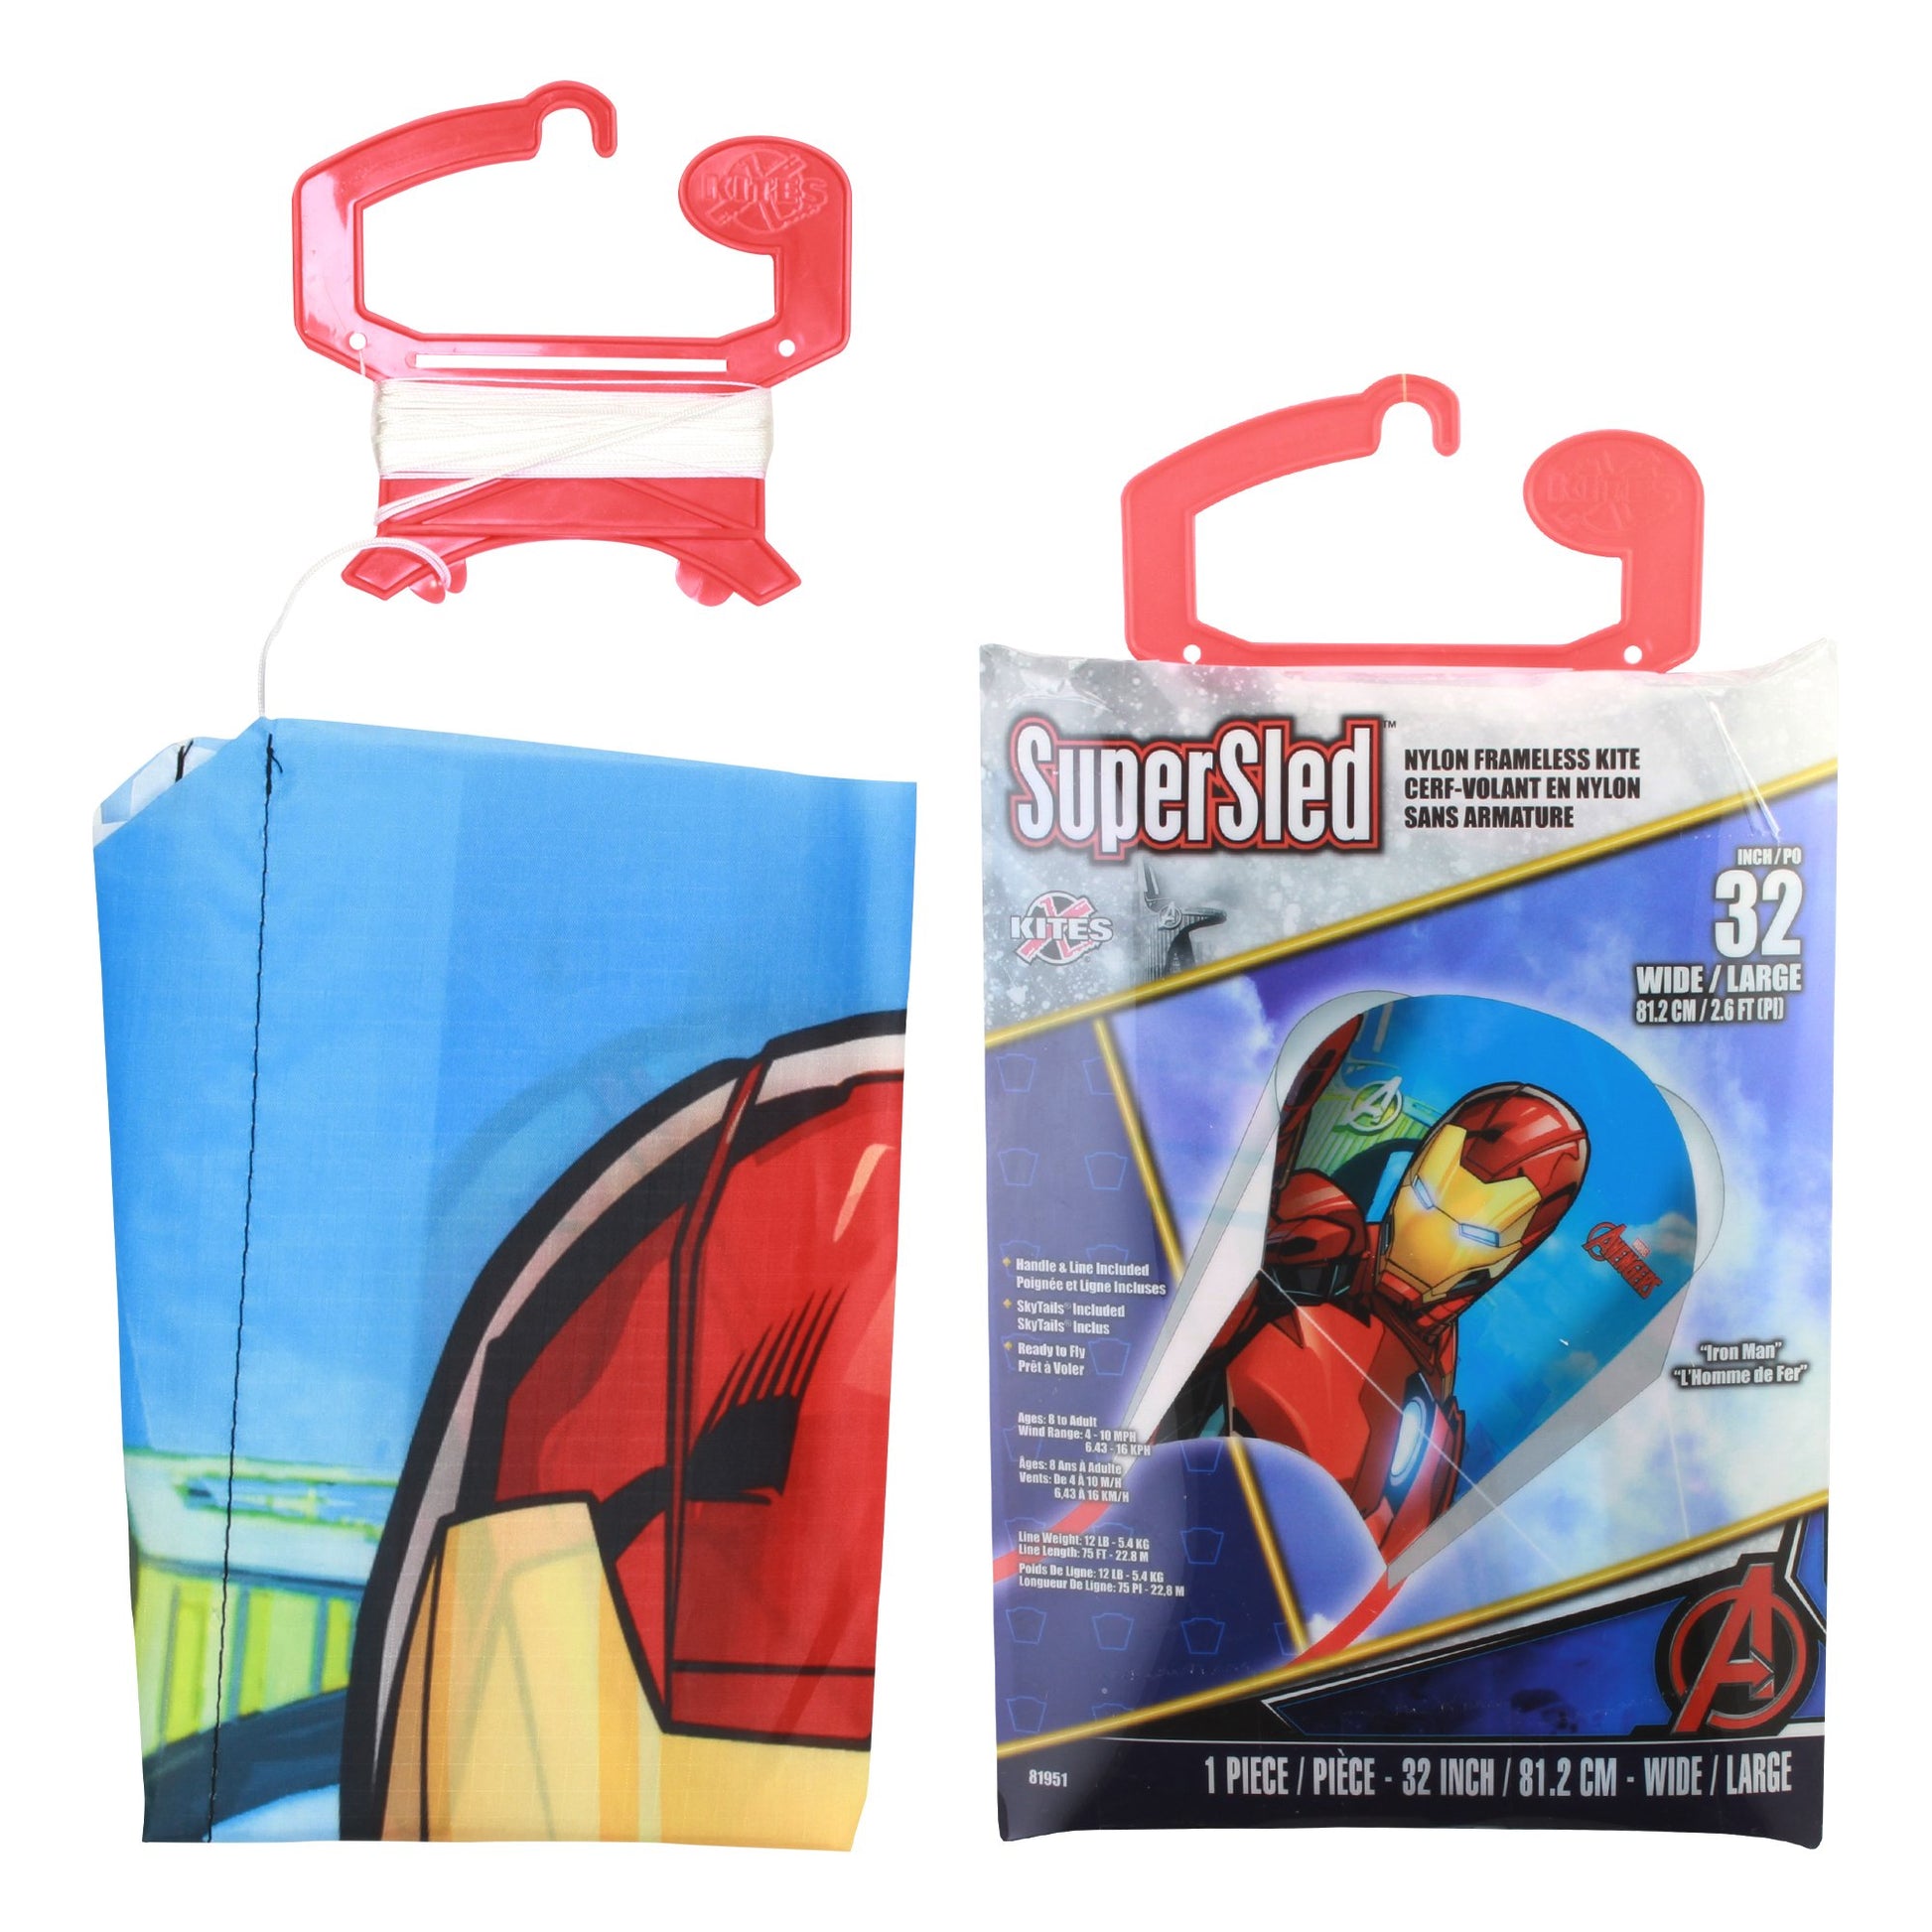 X Kites SuperSled Avengers Nylon Kite packaging and contents